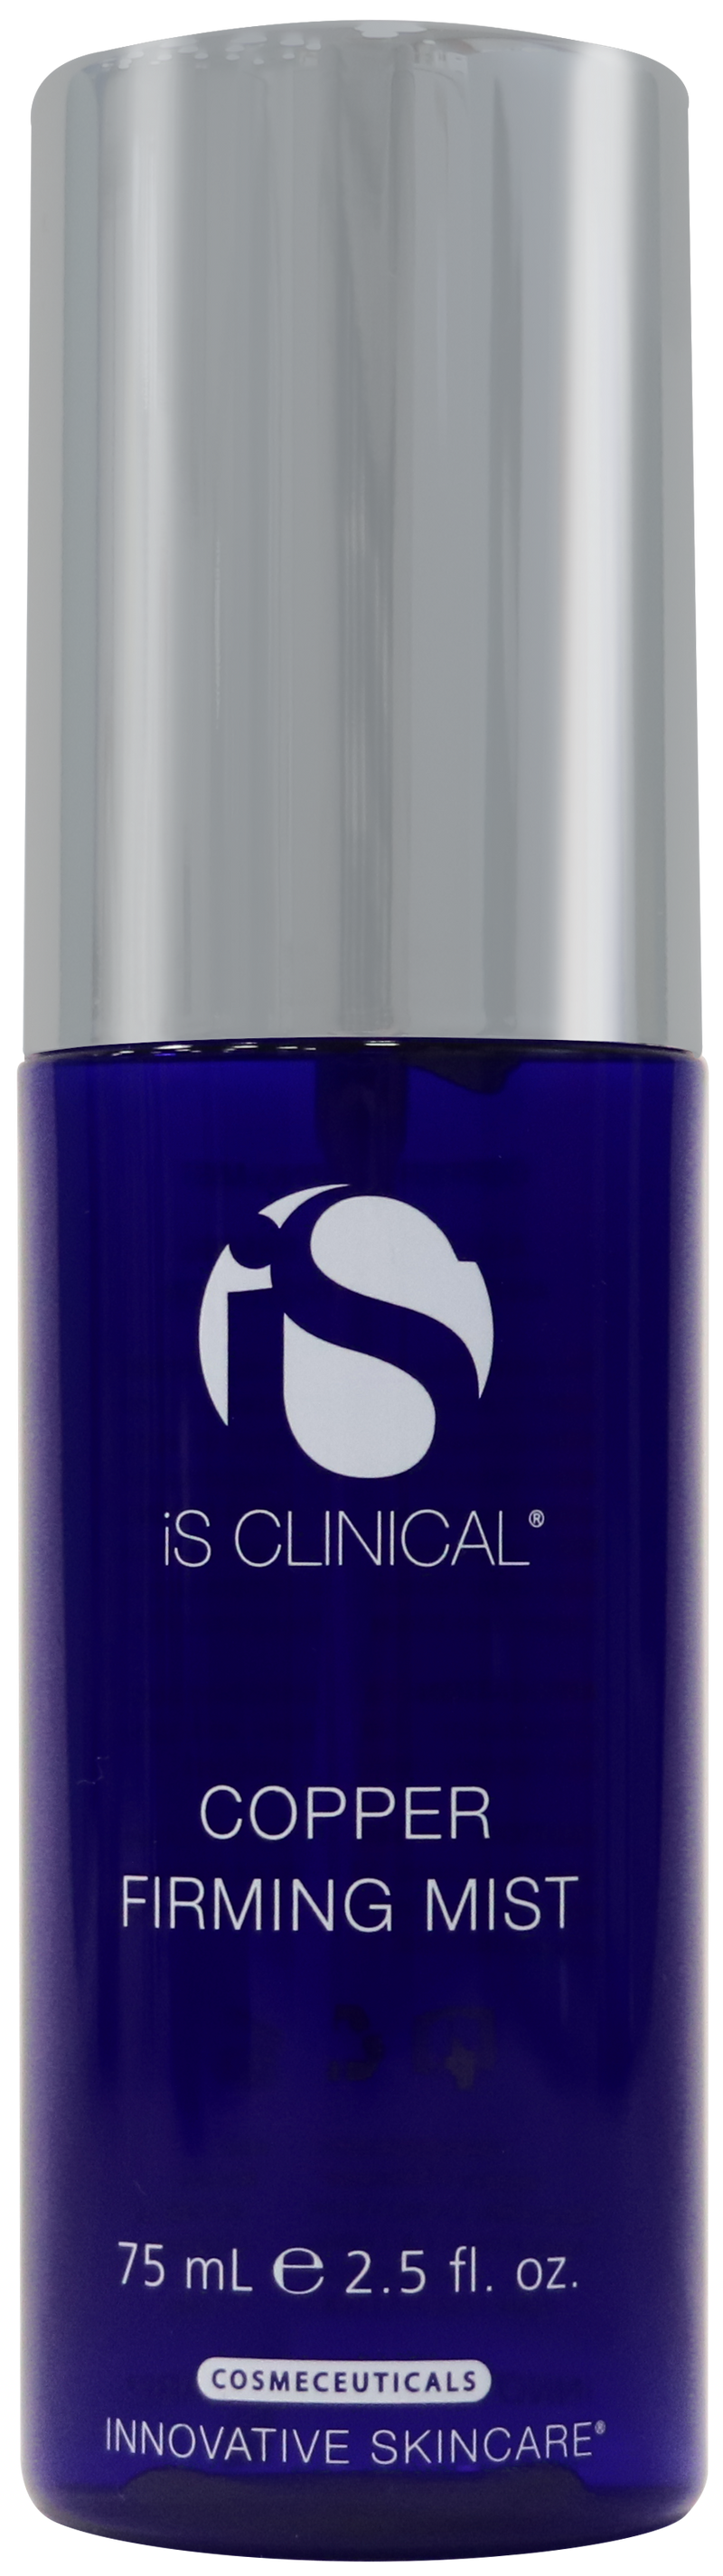 iS Clinical COPPER FIRMING MIST (75ml)